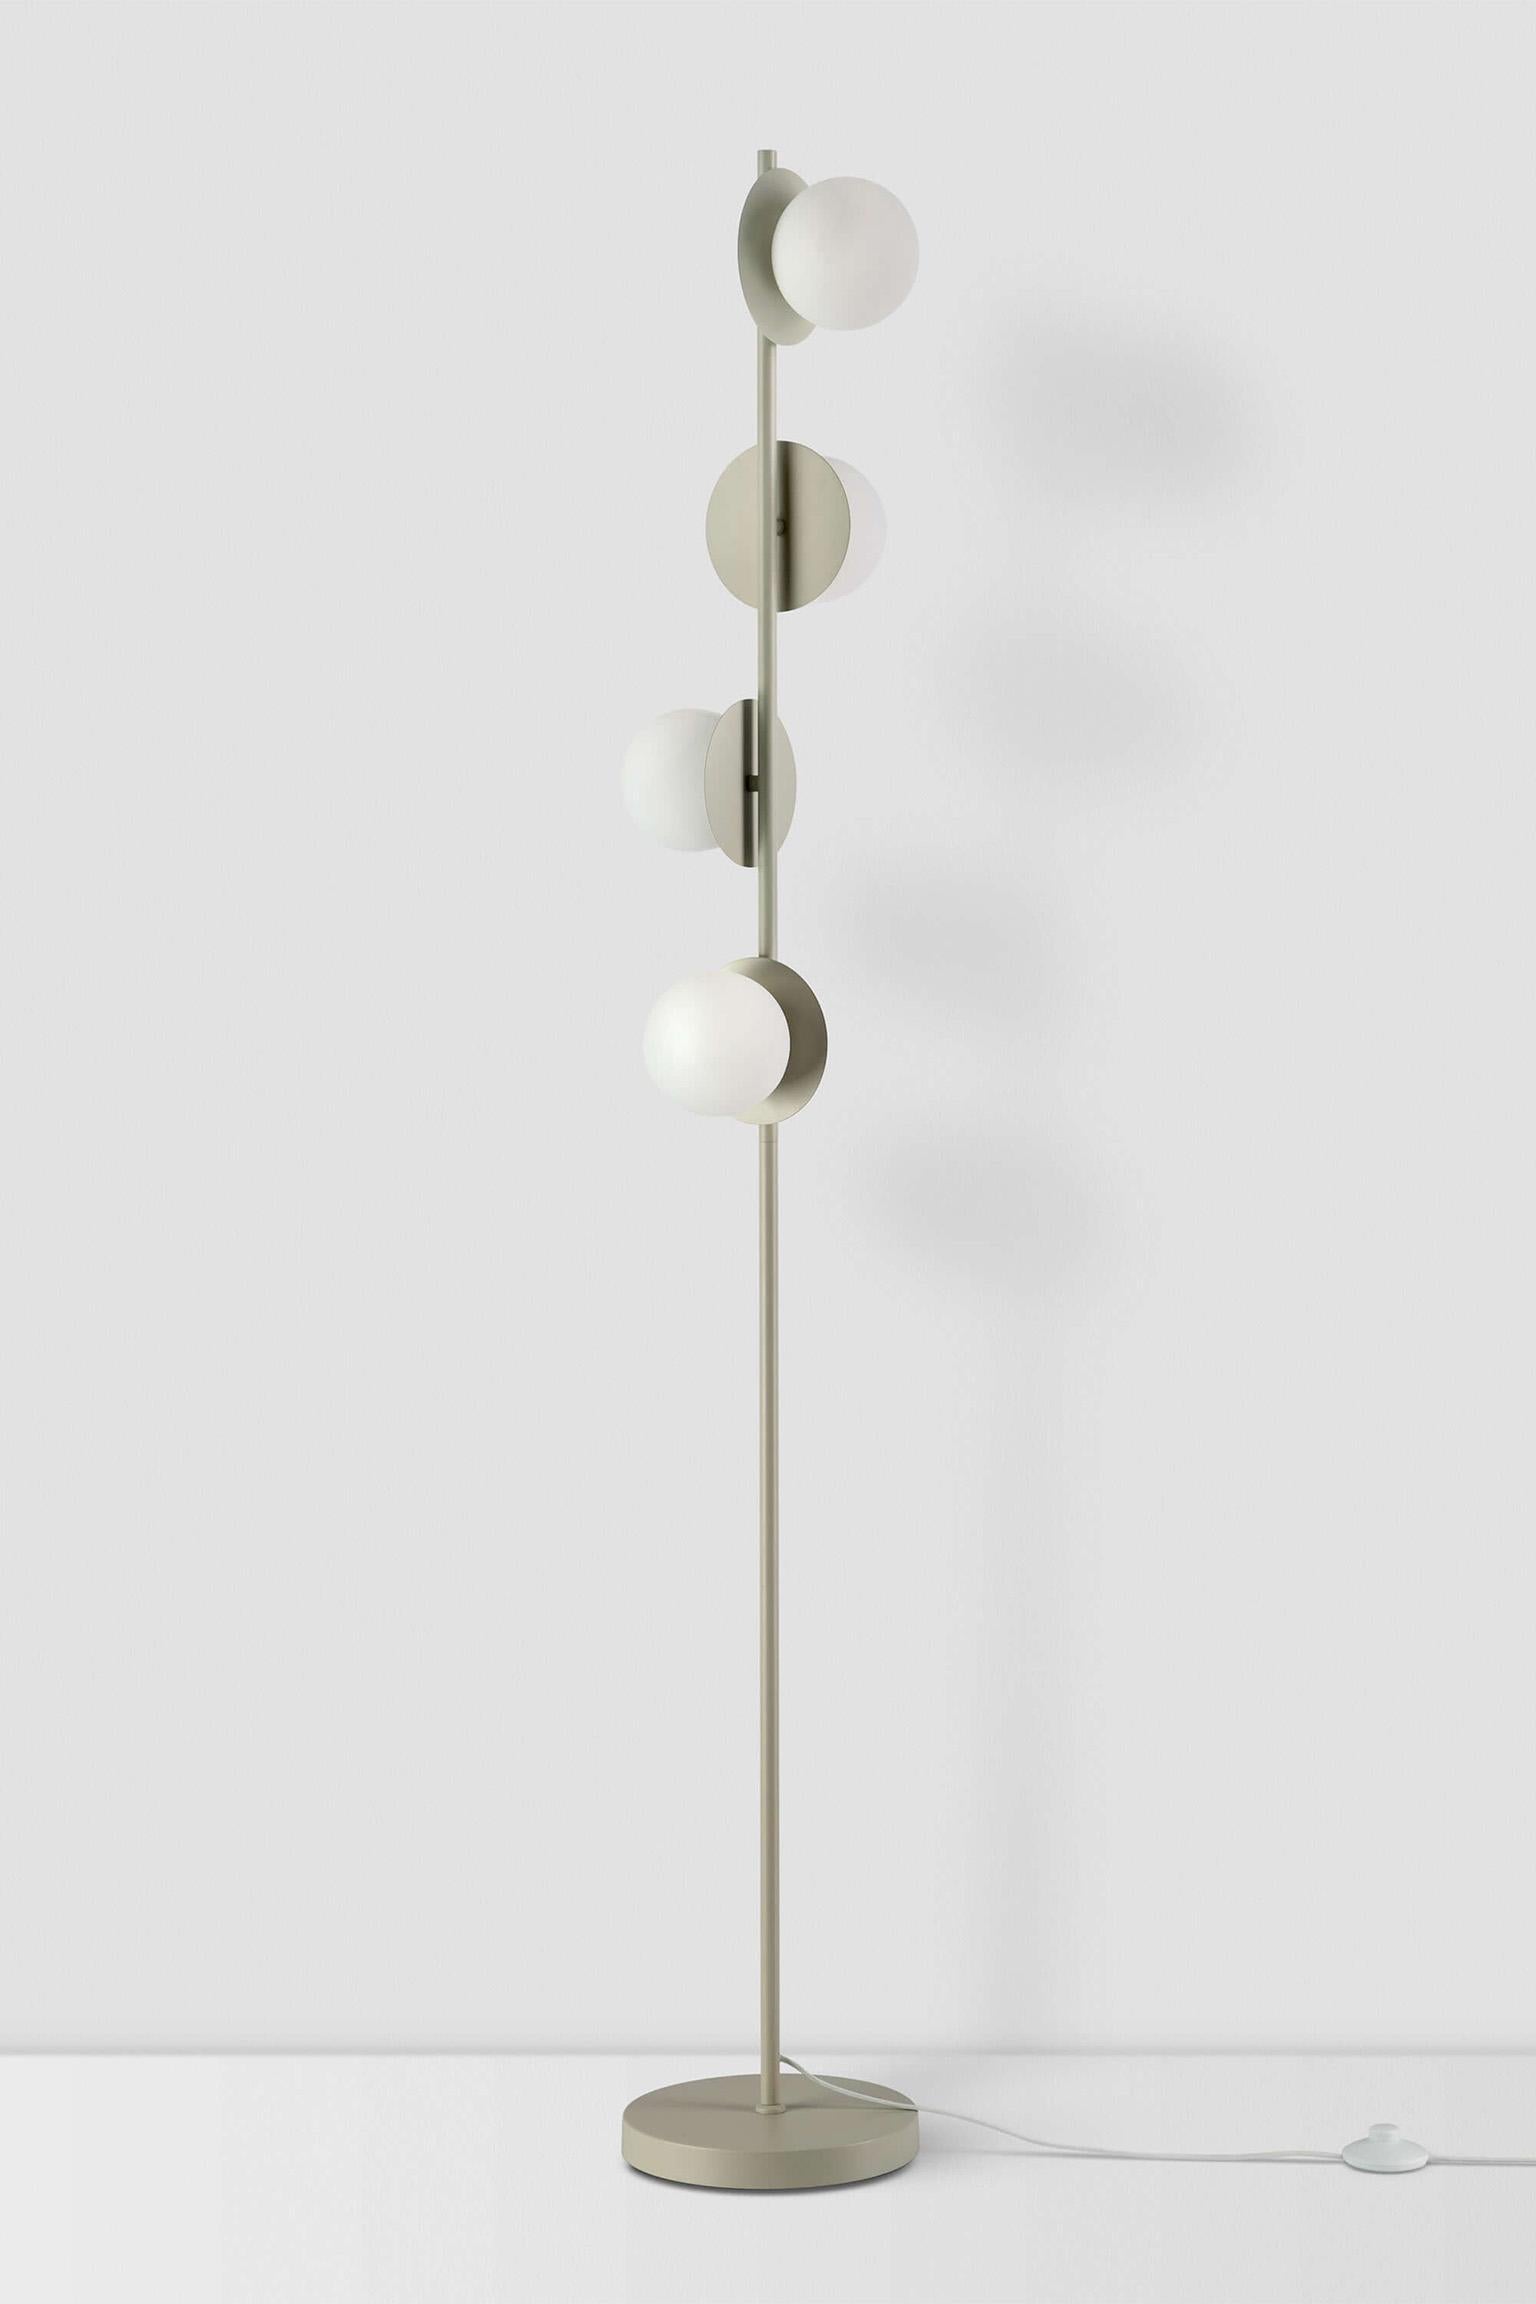 This modern floor lamp is an absolute 